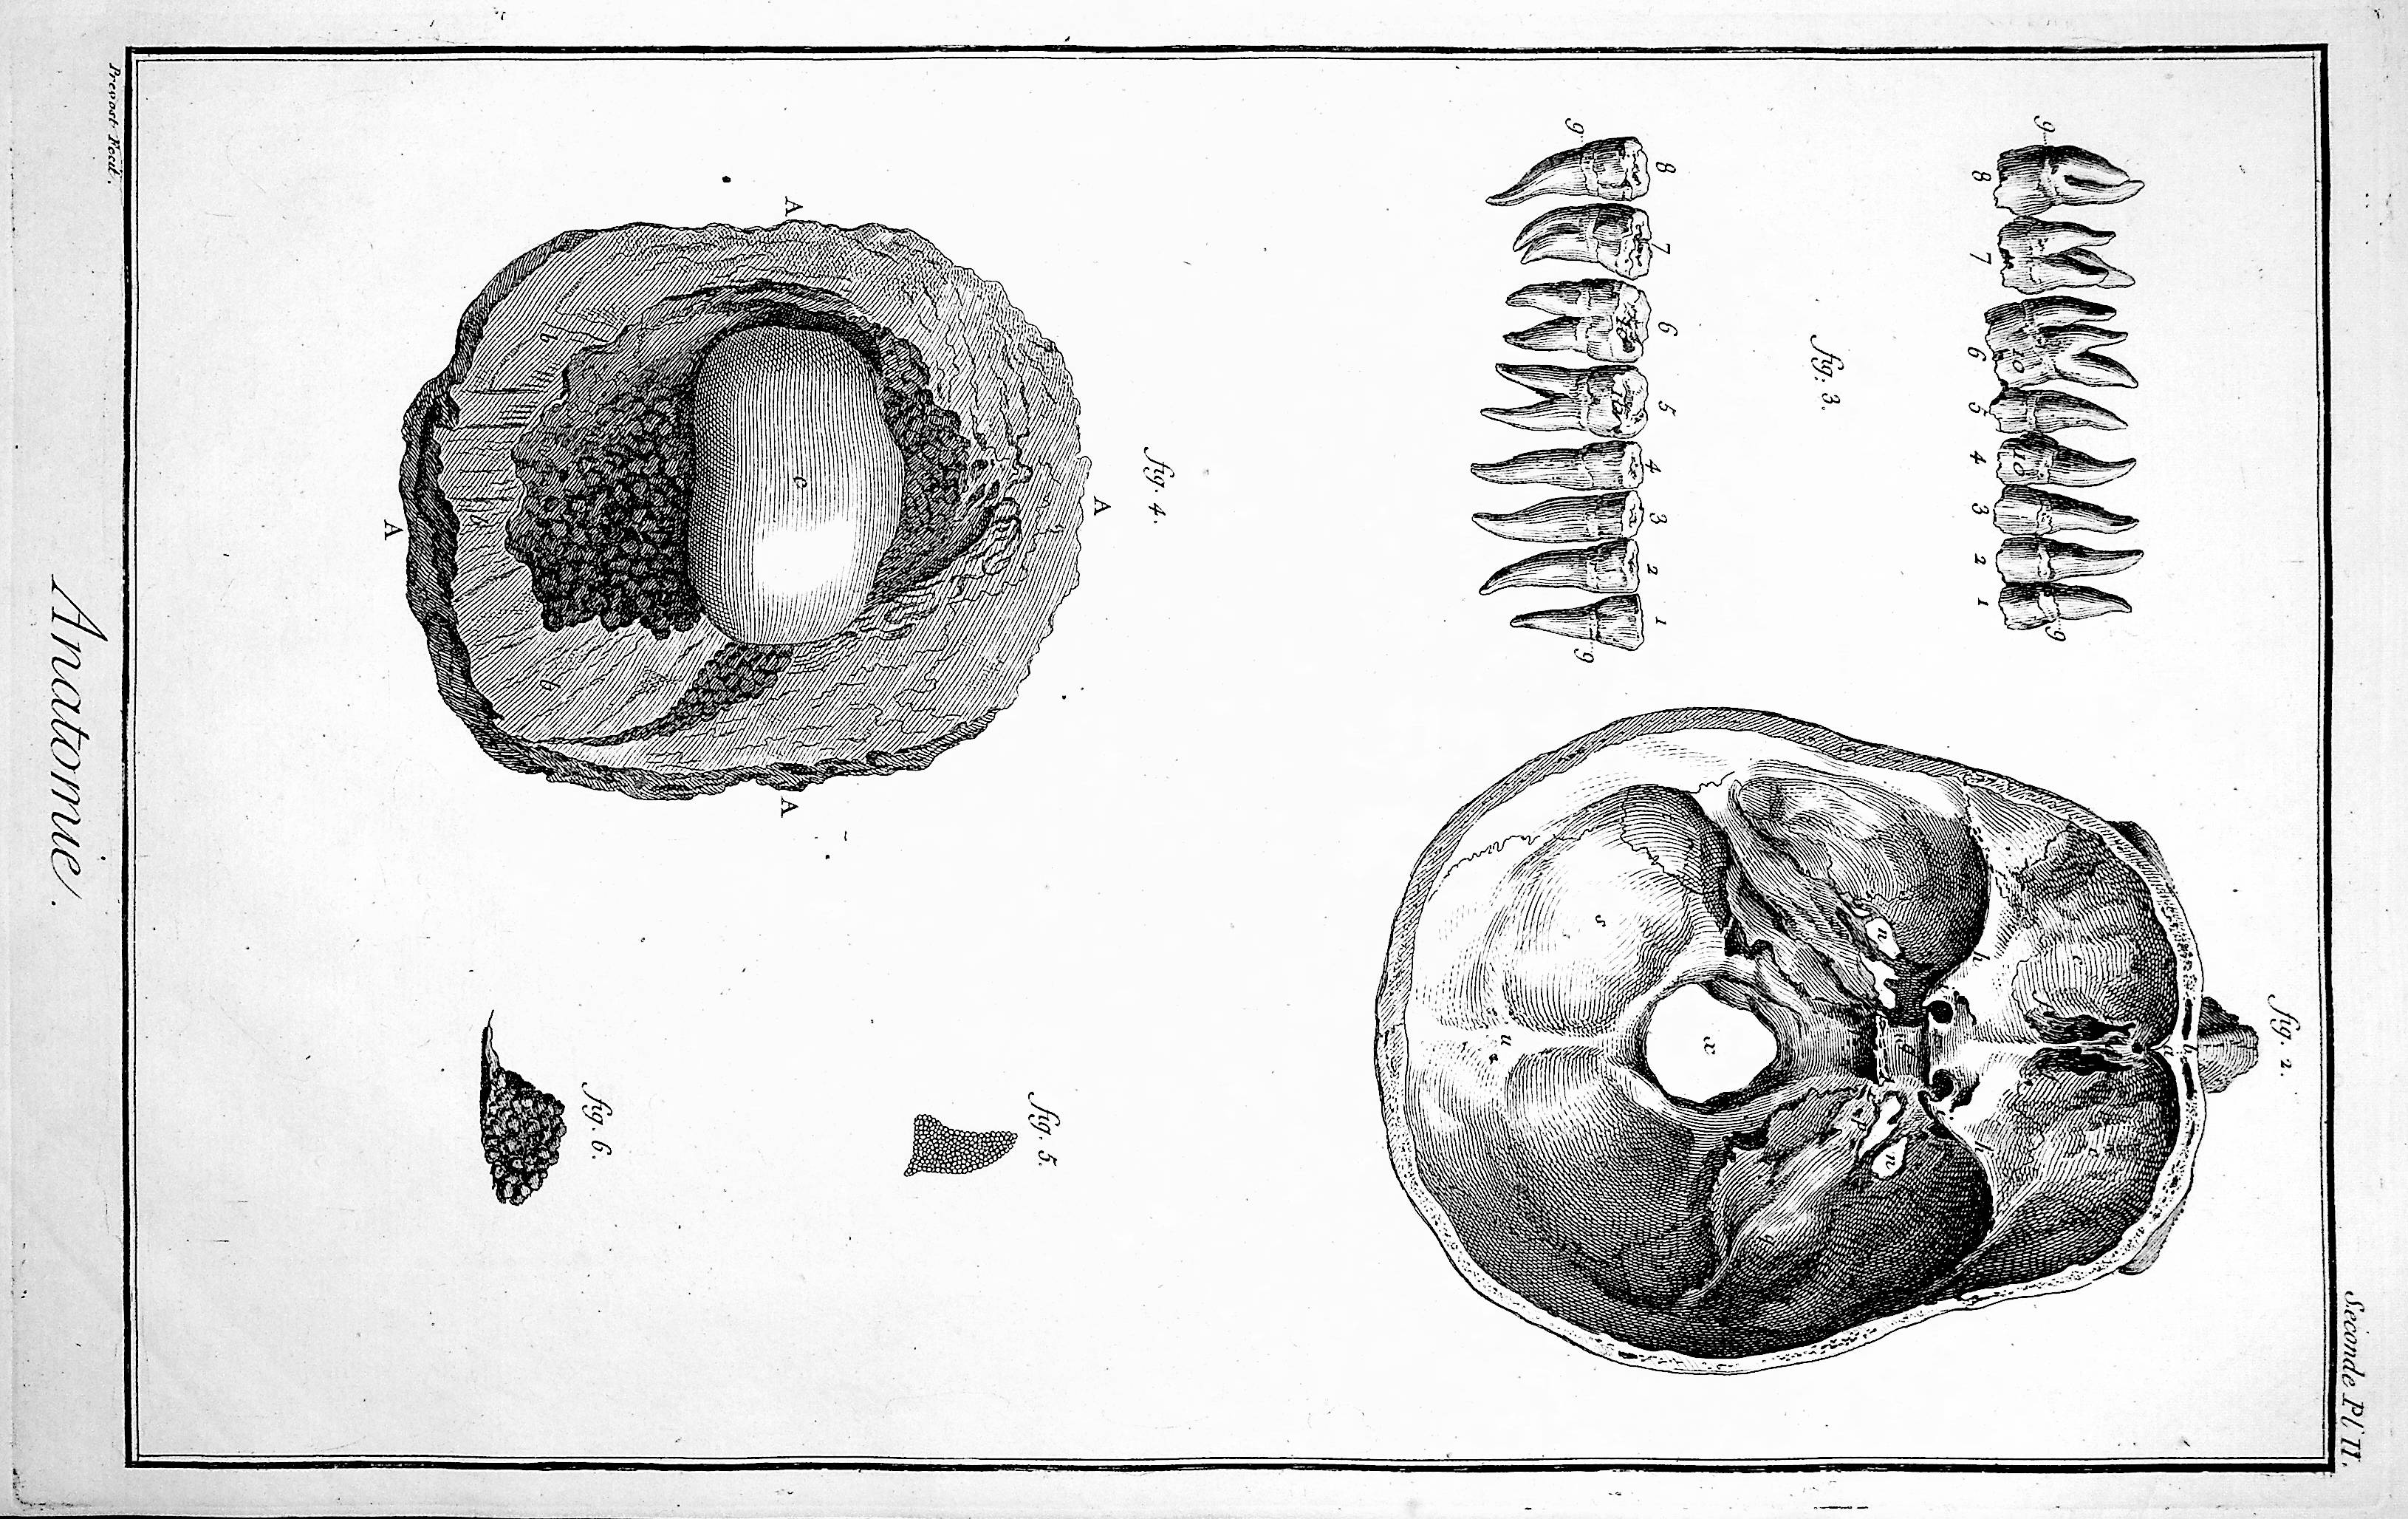 Image for Encyclopedie, Anatomie Plate II No 2. The base of the skull & other details after Havers